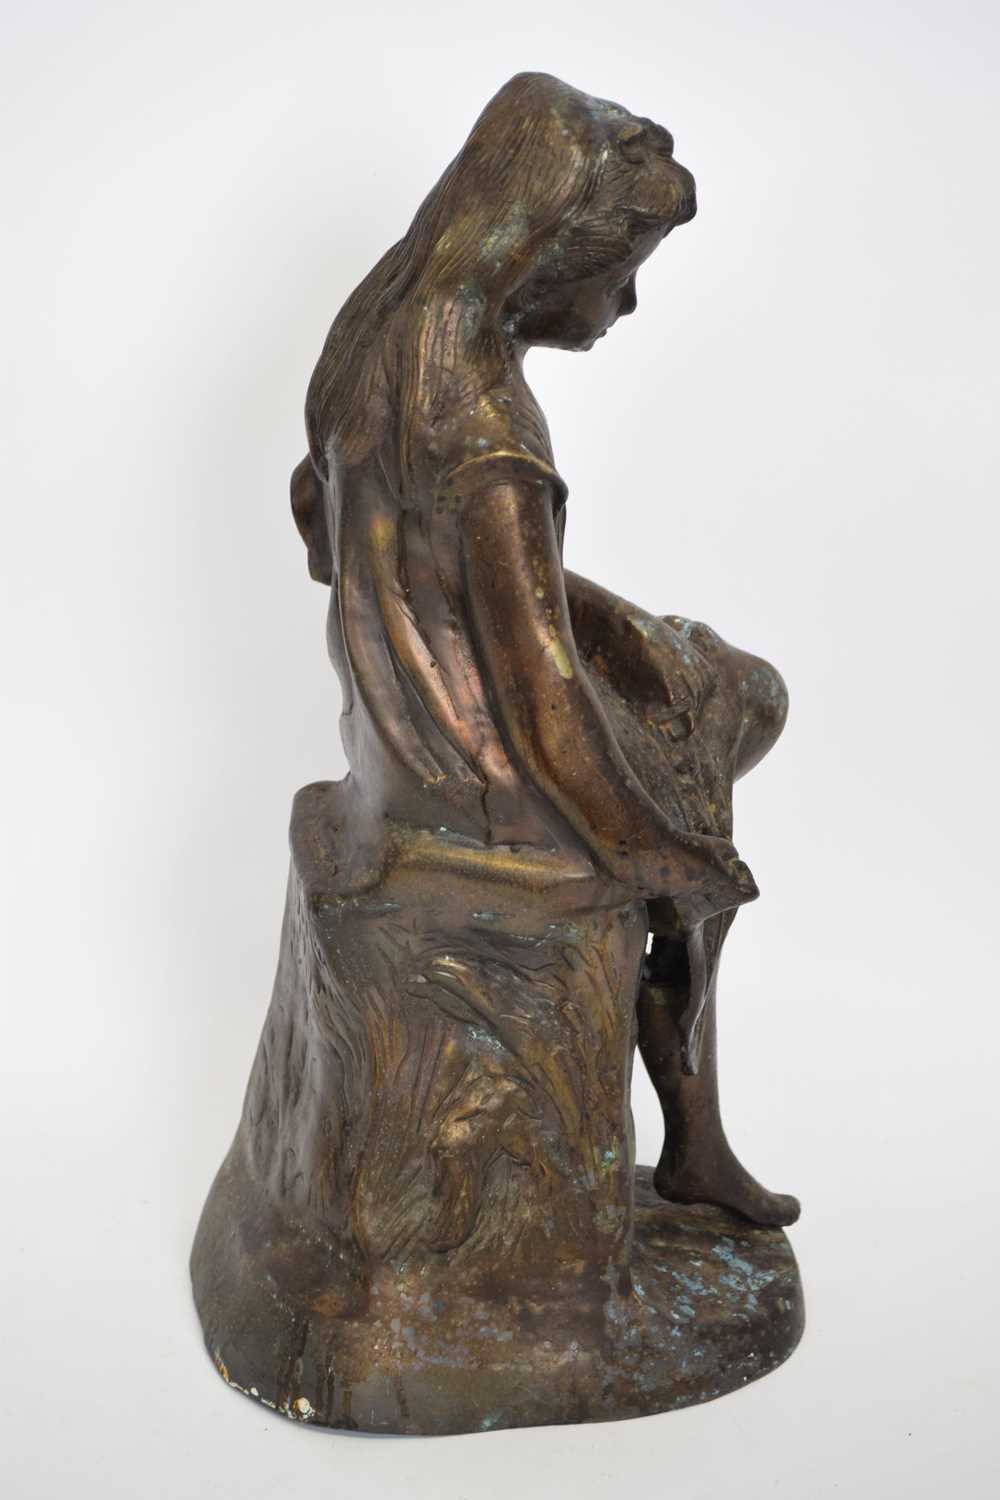 20th century hollow bronzed metal figure of a seated girl, 43cm high - Image 2 of 4